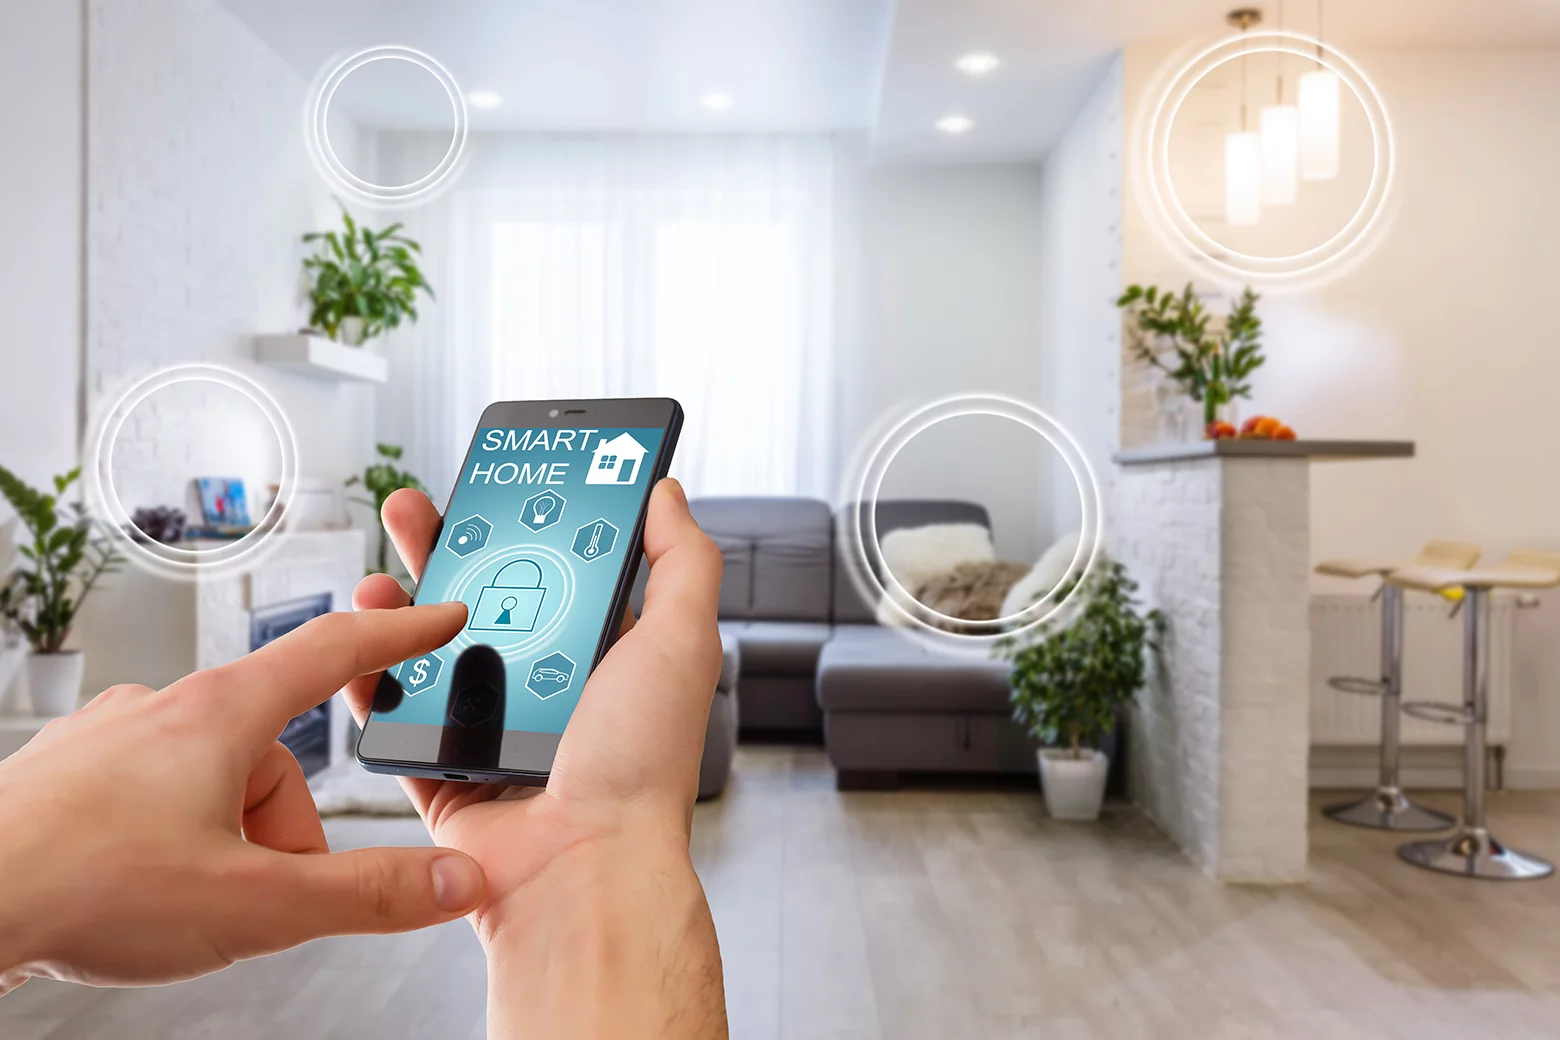 You are currently viewing Smart Home Integration: Explore the latest technologies and devices that can turn your home into a smart, connected space.